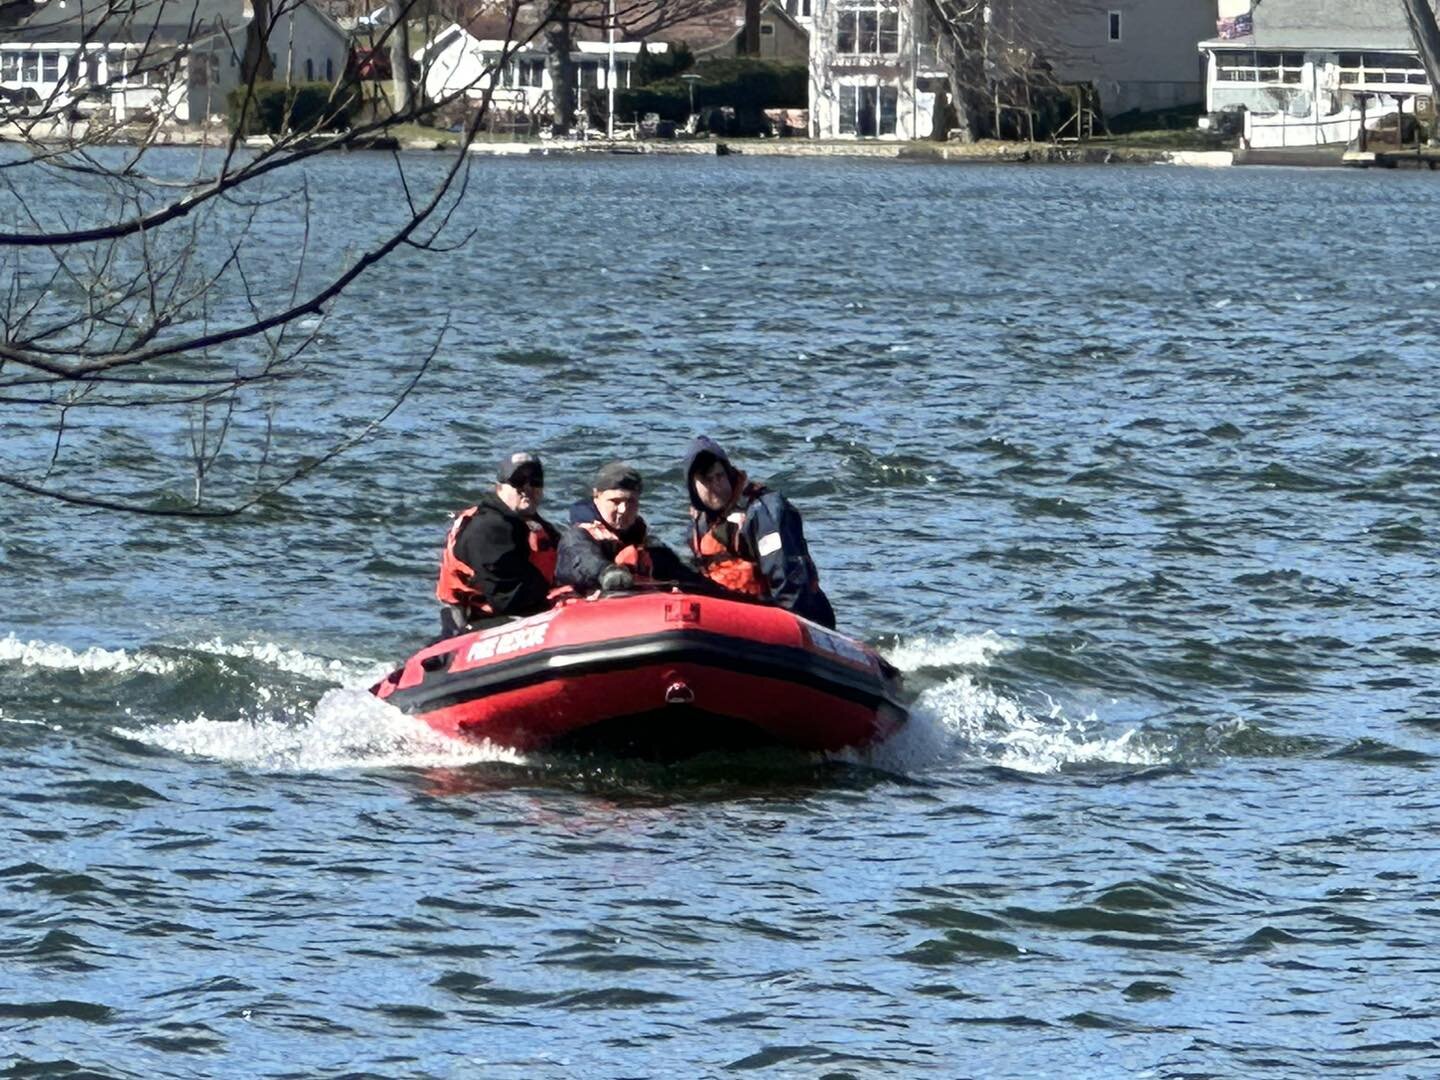 Members had the opportunity to participate in a great drill with some of our mutual aid partners Sunday morning at Lake Beseck. 

Water Training Resources was able to provide a vehicle prop, made safe for the environment, that was submerged into the 